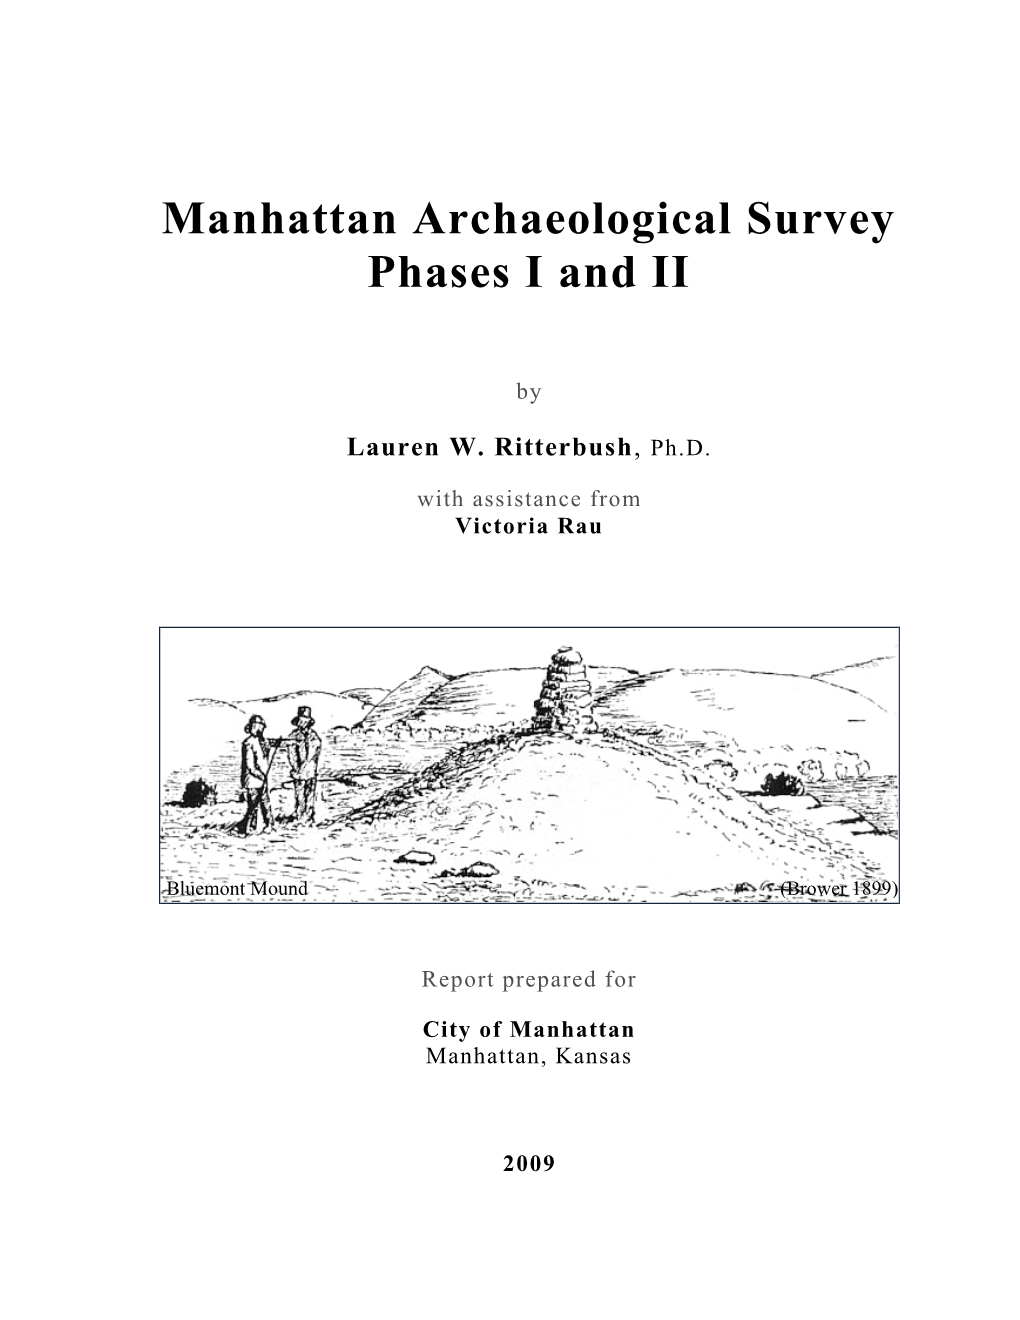 Manhattan Archaeological Survey Phases I and II